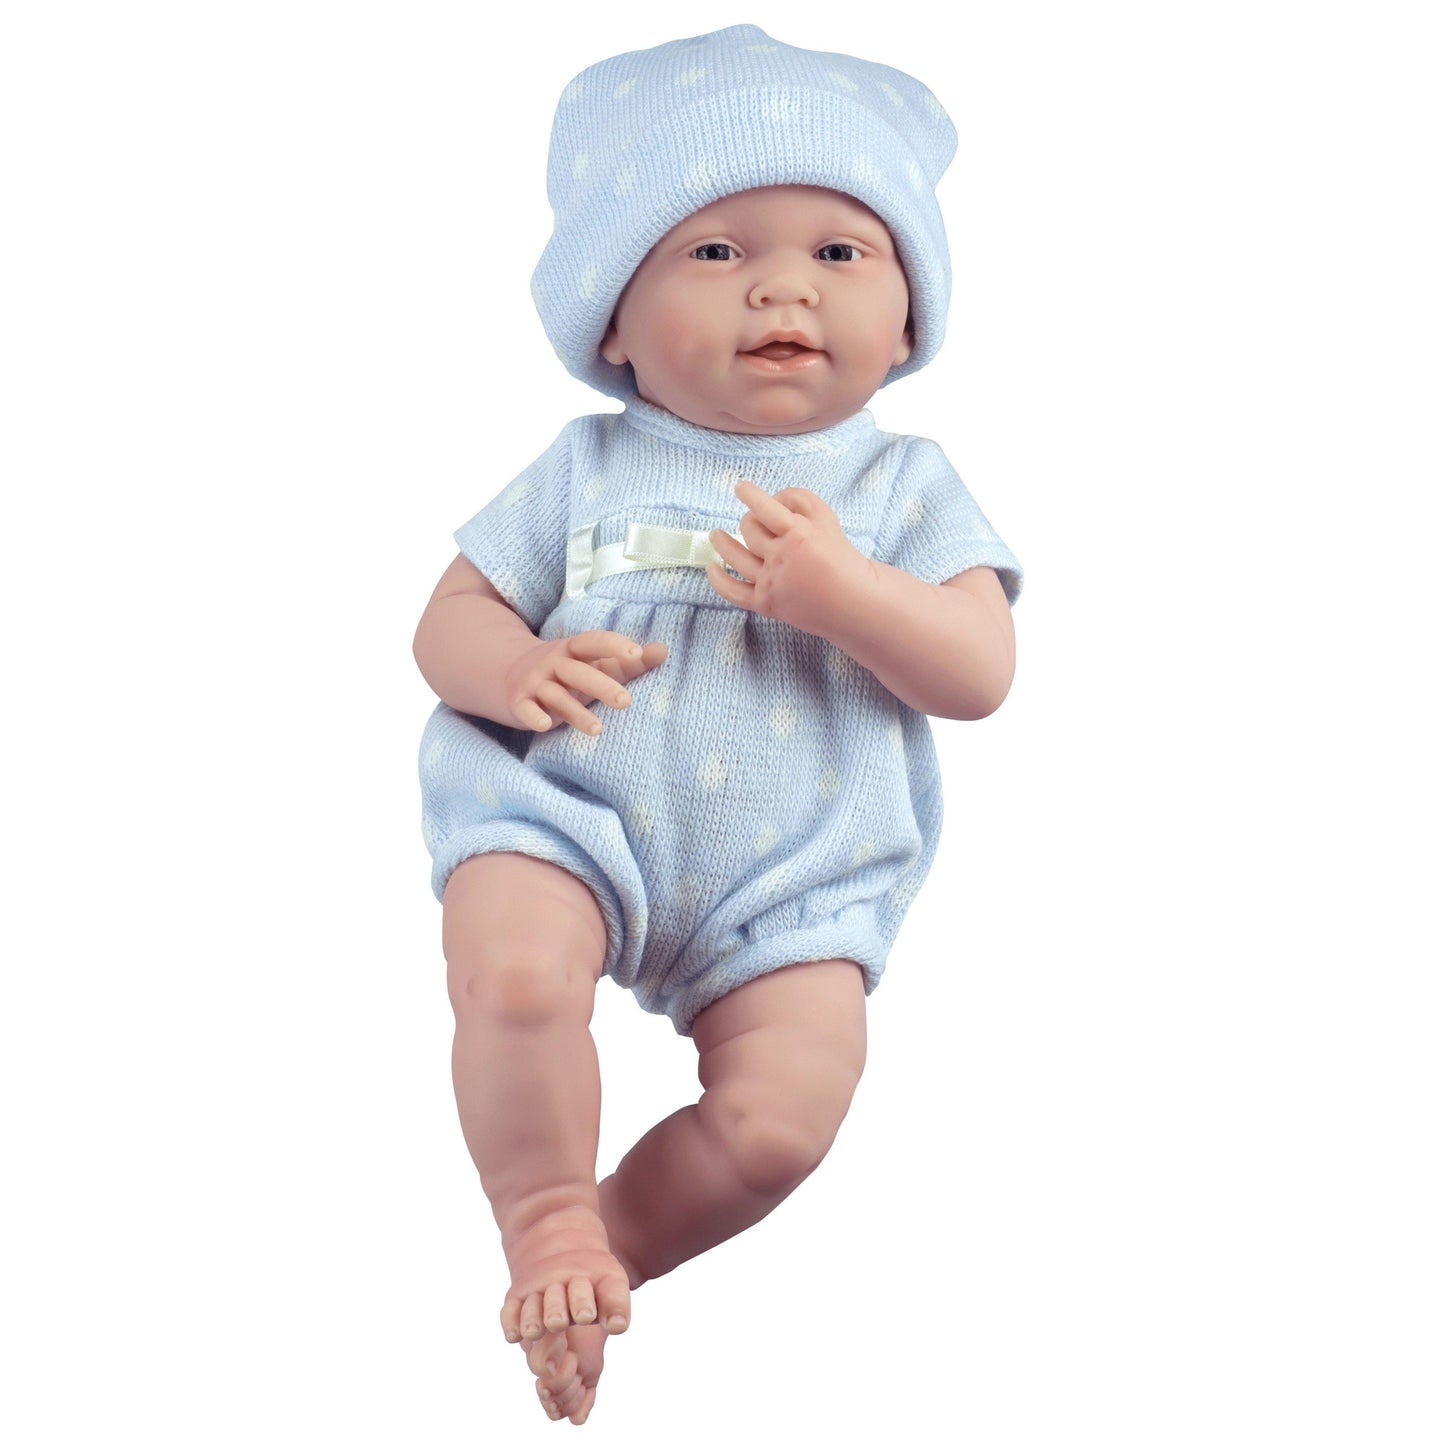 JC Toys, La Newborn All-Vinyl 15 Inch Real Boy Baby Doll - Blue Knit Outfit - JC Toys Group Inc.